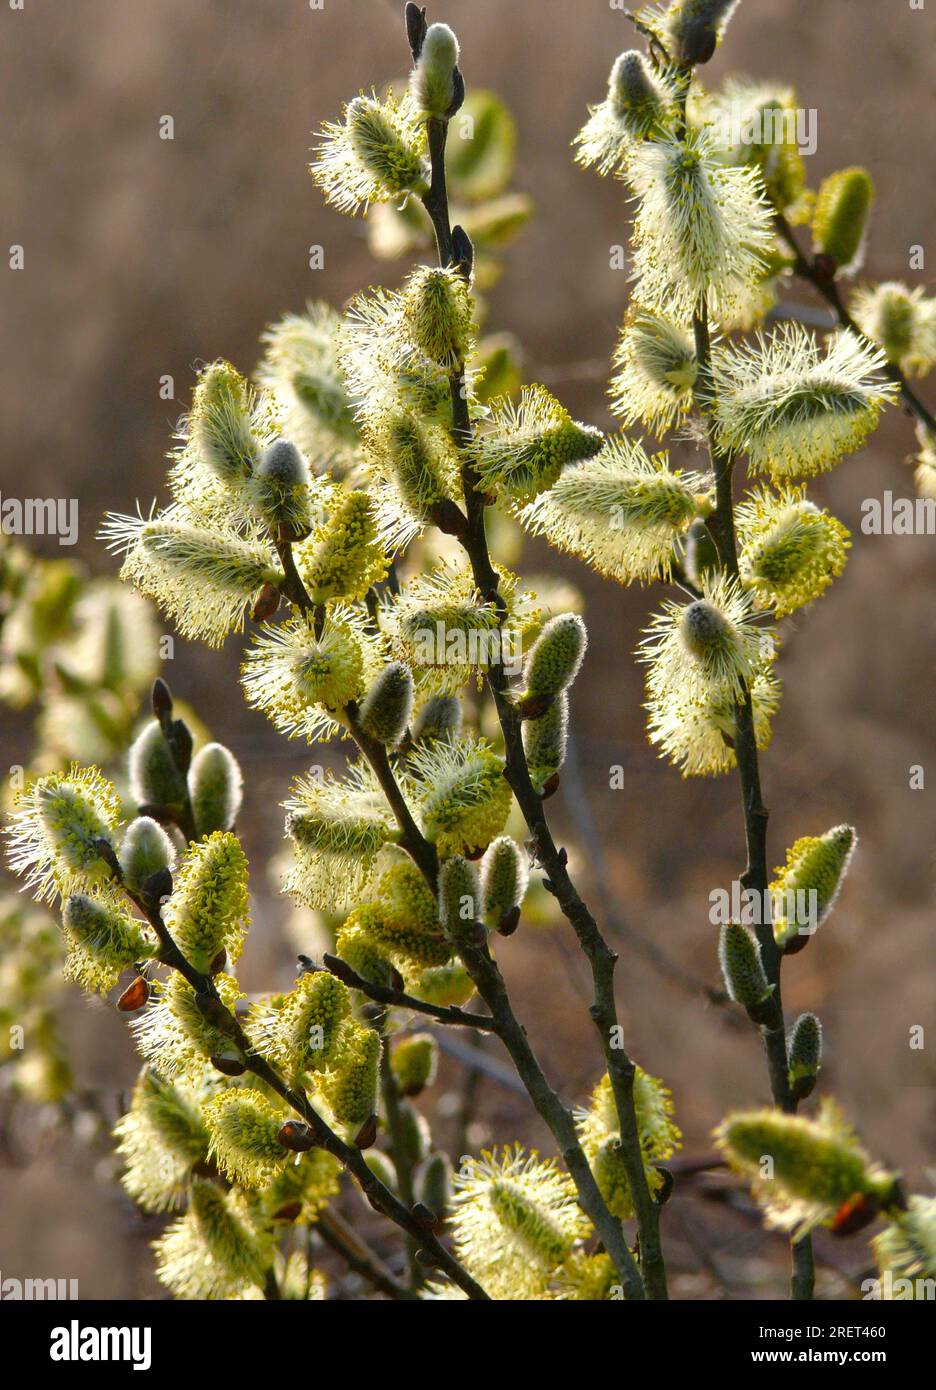 Willow blossom, willow catkin, goat willow (Salix caprea) Stock Photo